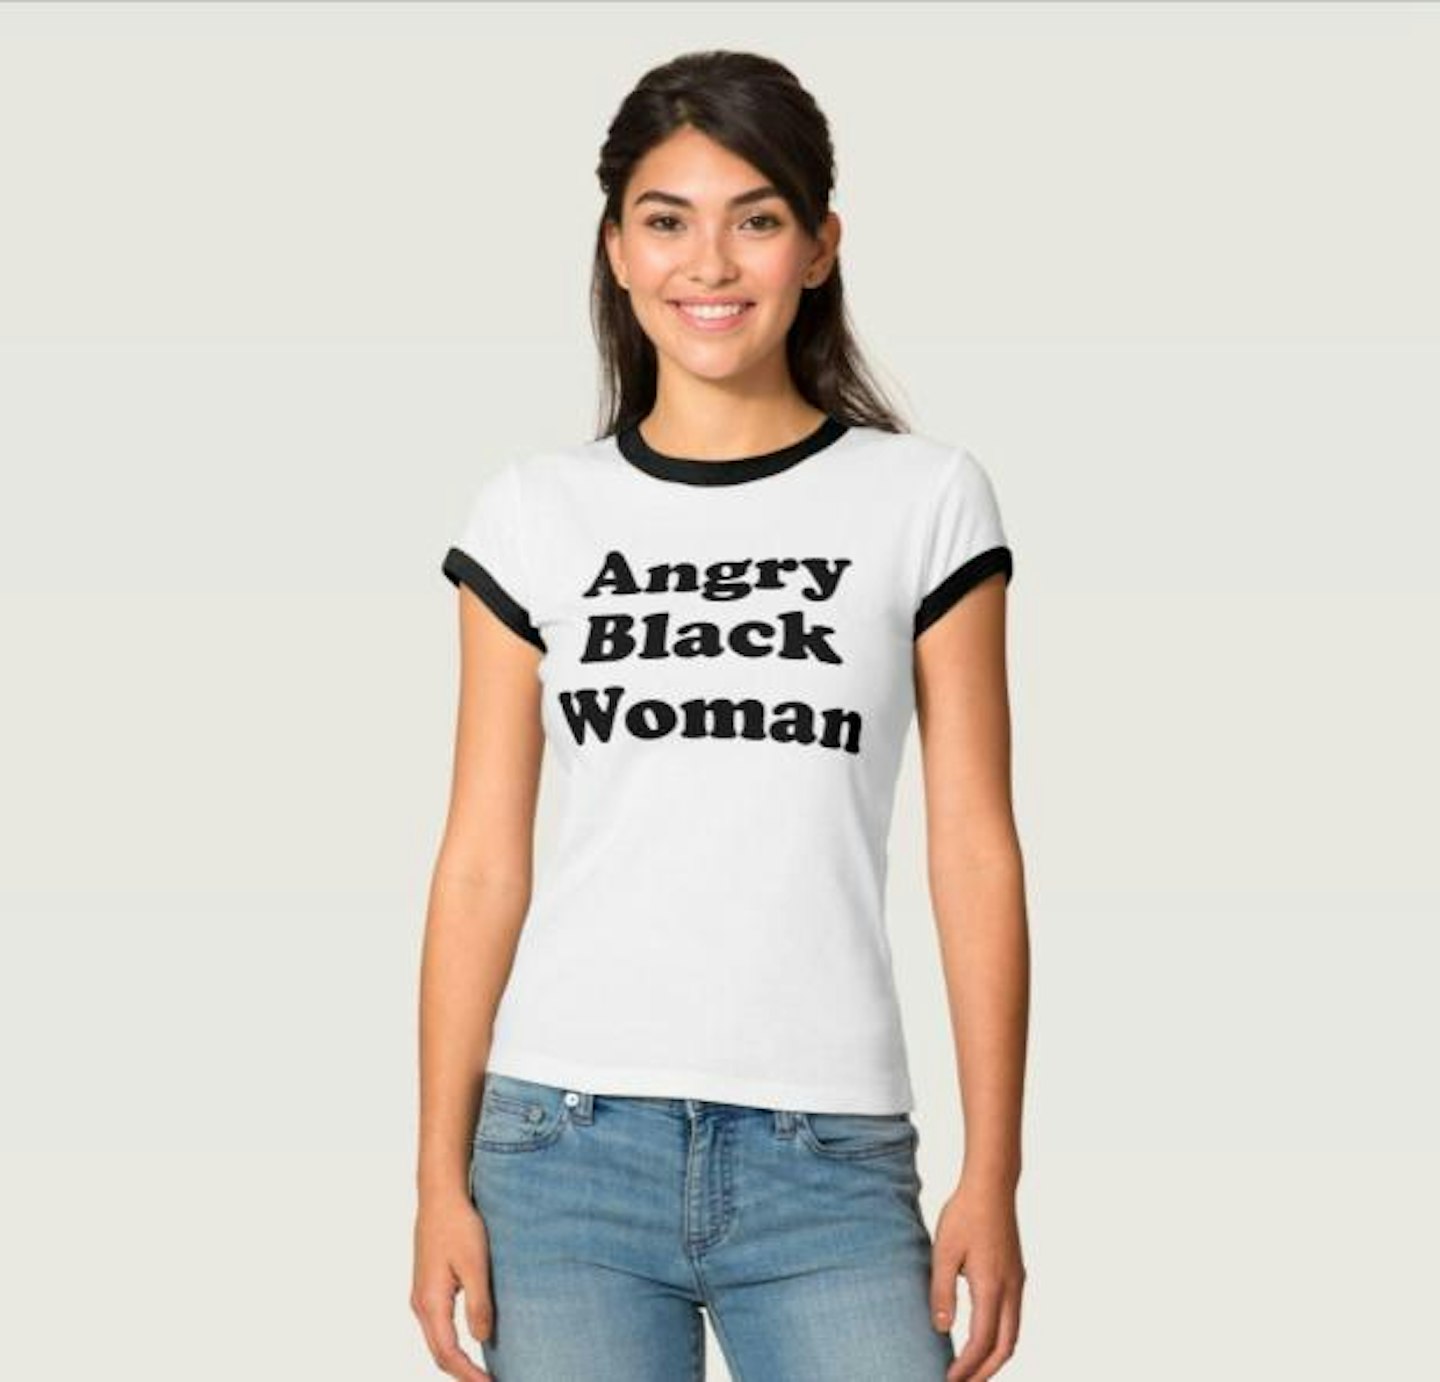 In 2017, t-shirts on Zazzle's site caused similar uproar